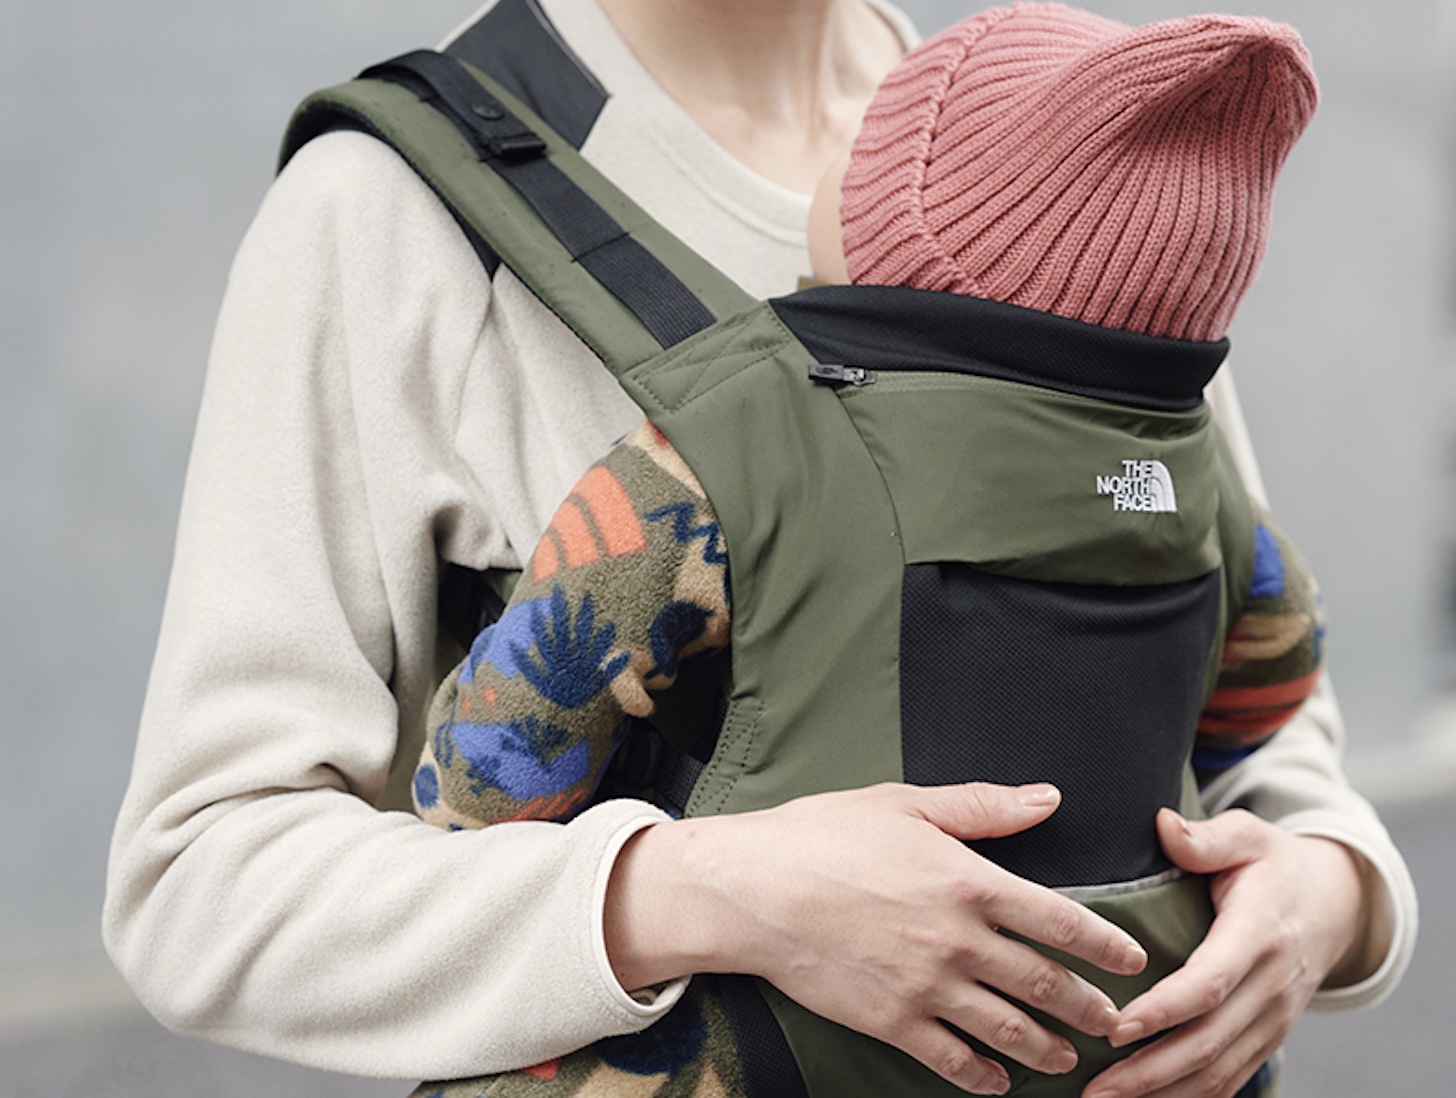 THE NORTH FACE、抱っこ紐「Baby Compact Carrier」。野外活動で子供を